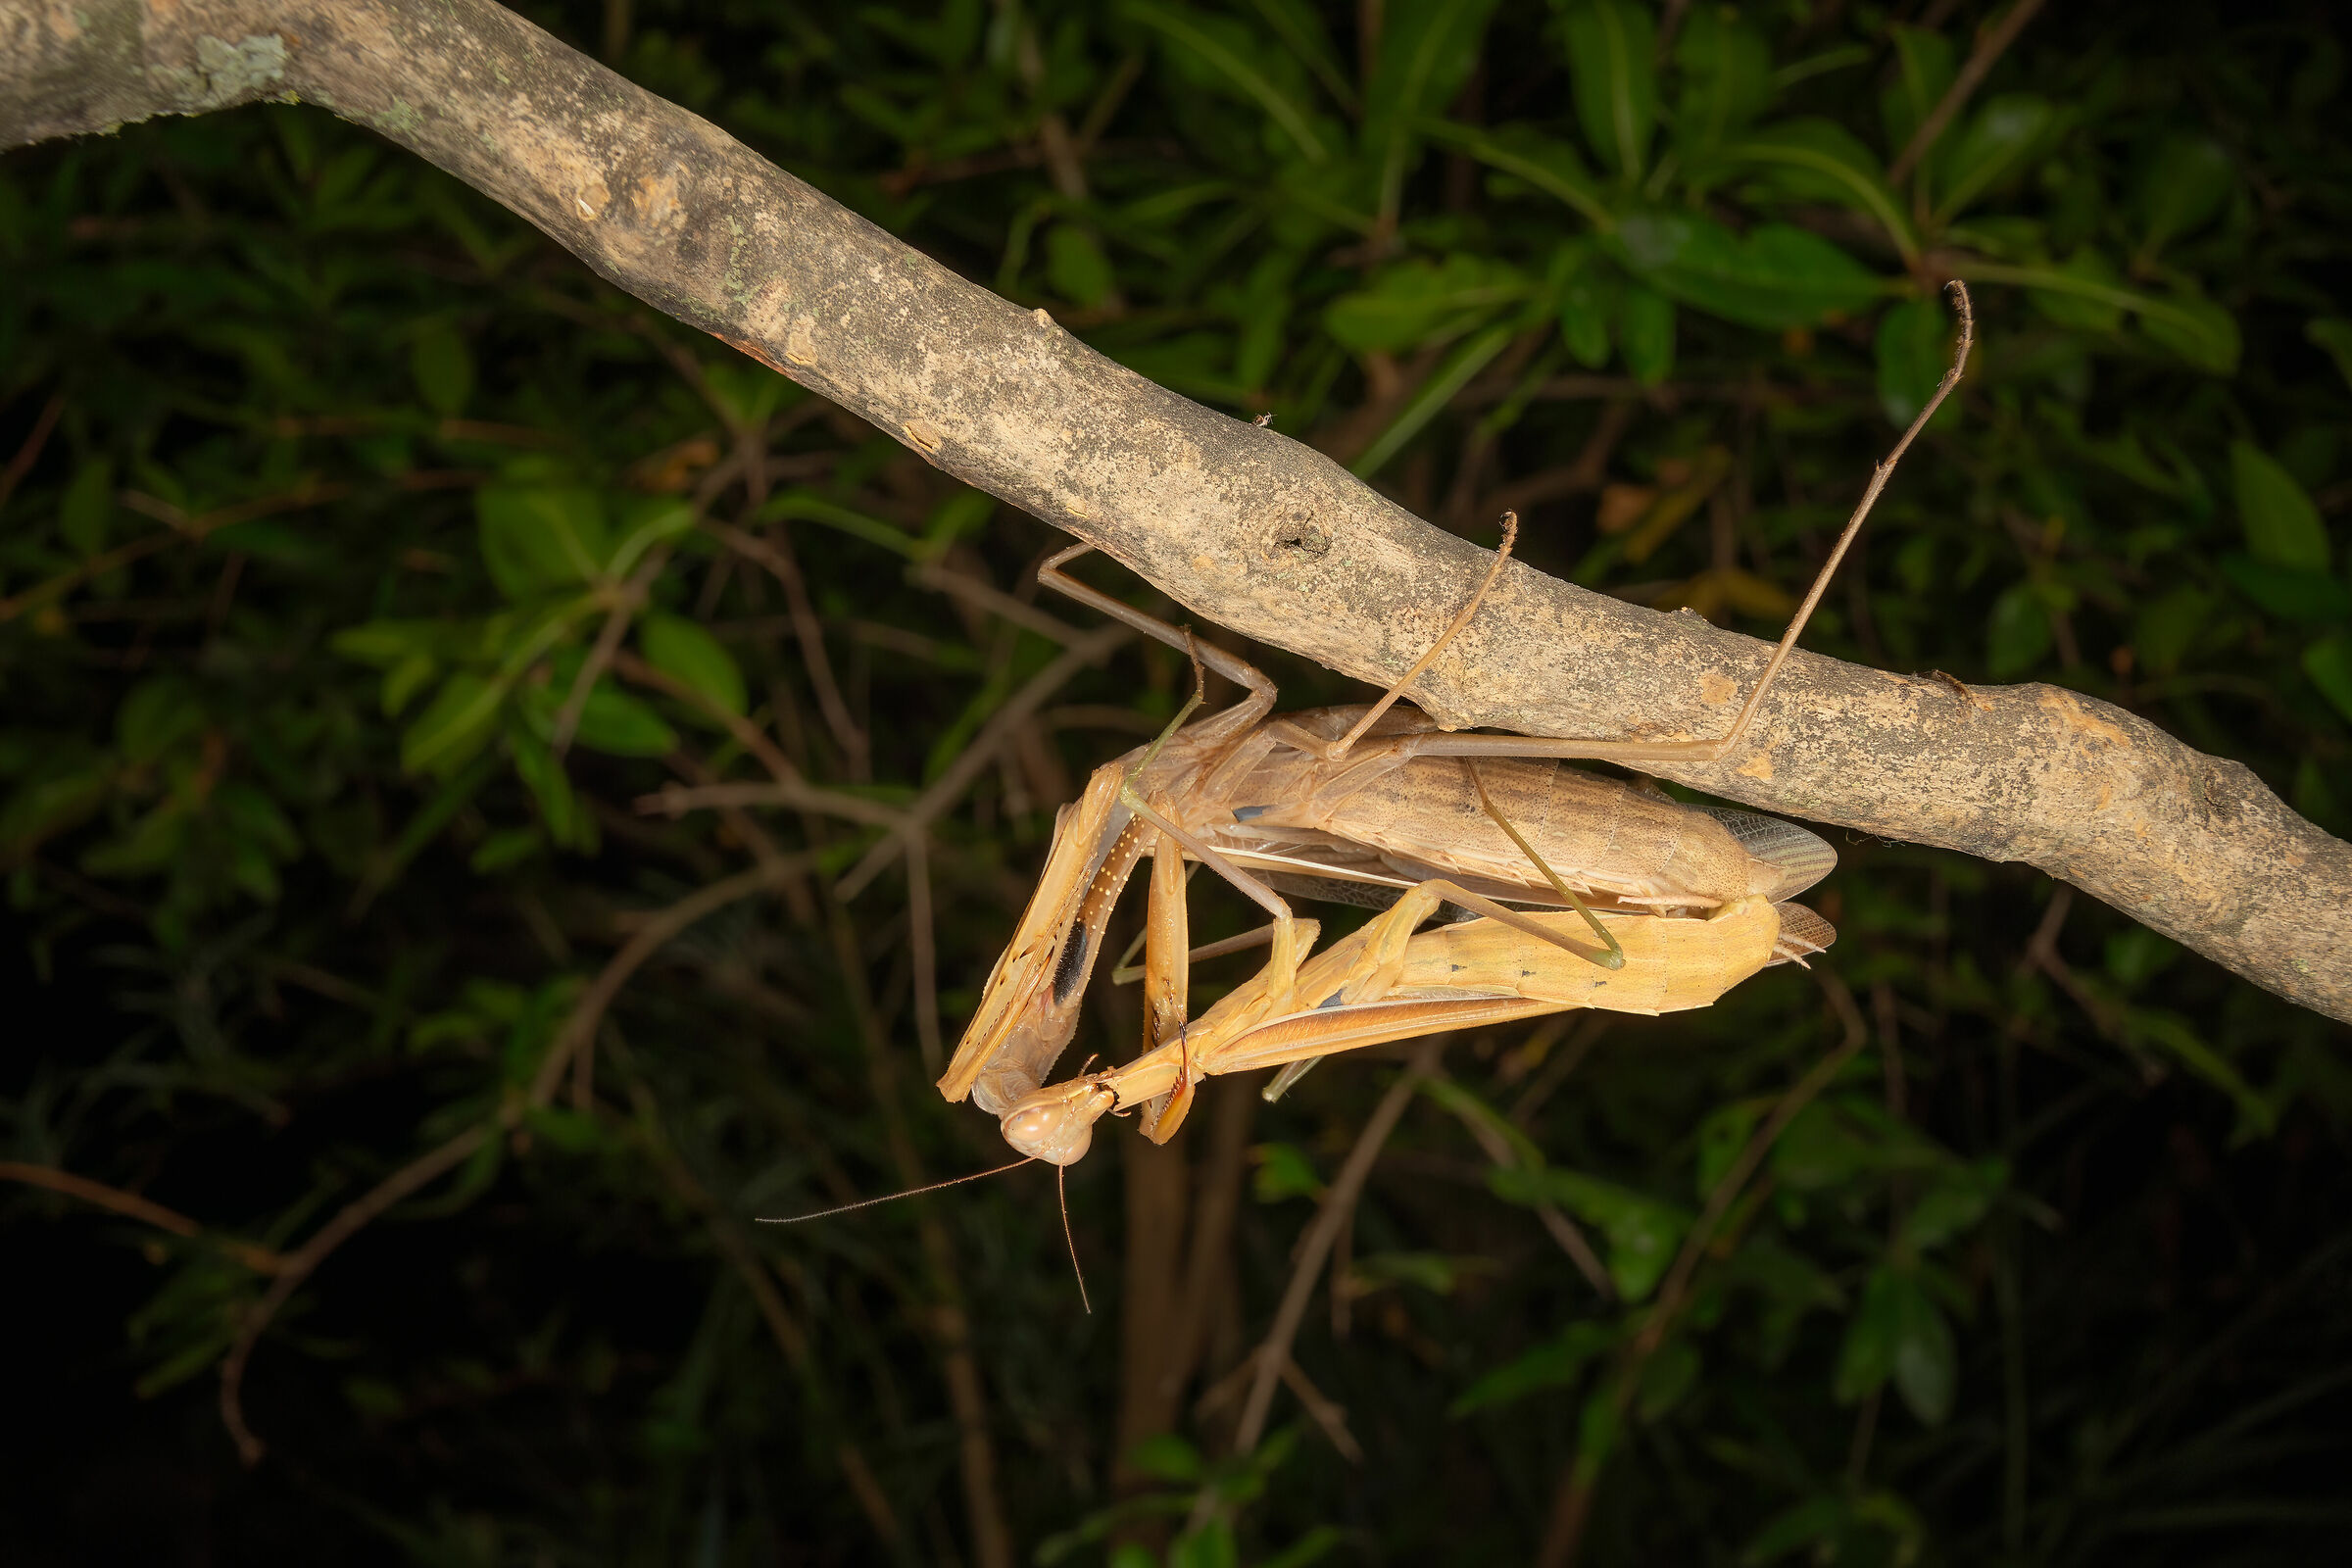 The Mating of the Mantis, 6...